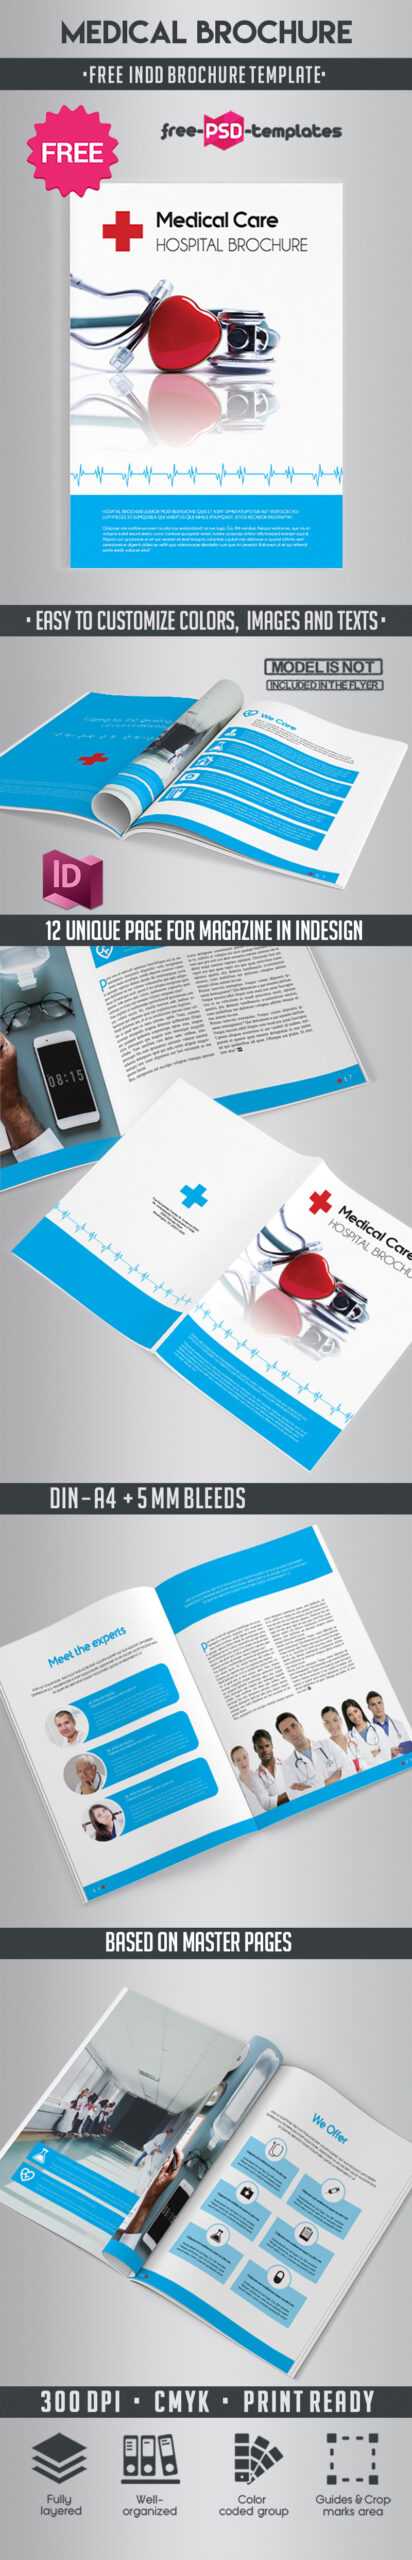 Free Medical Brochure Indd Template | Free Psd Templates With Brochure Template Indesign Free Download